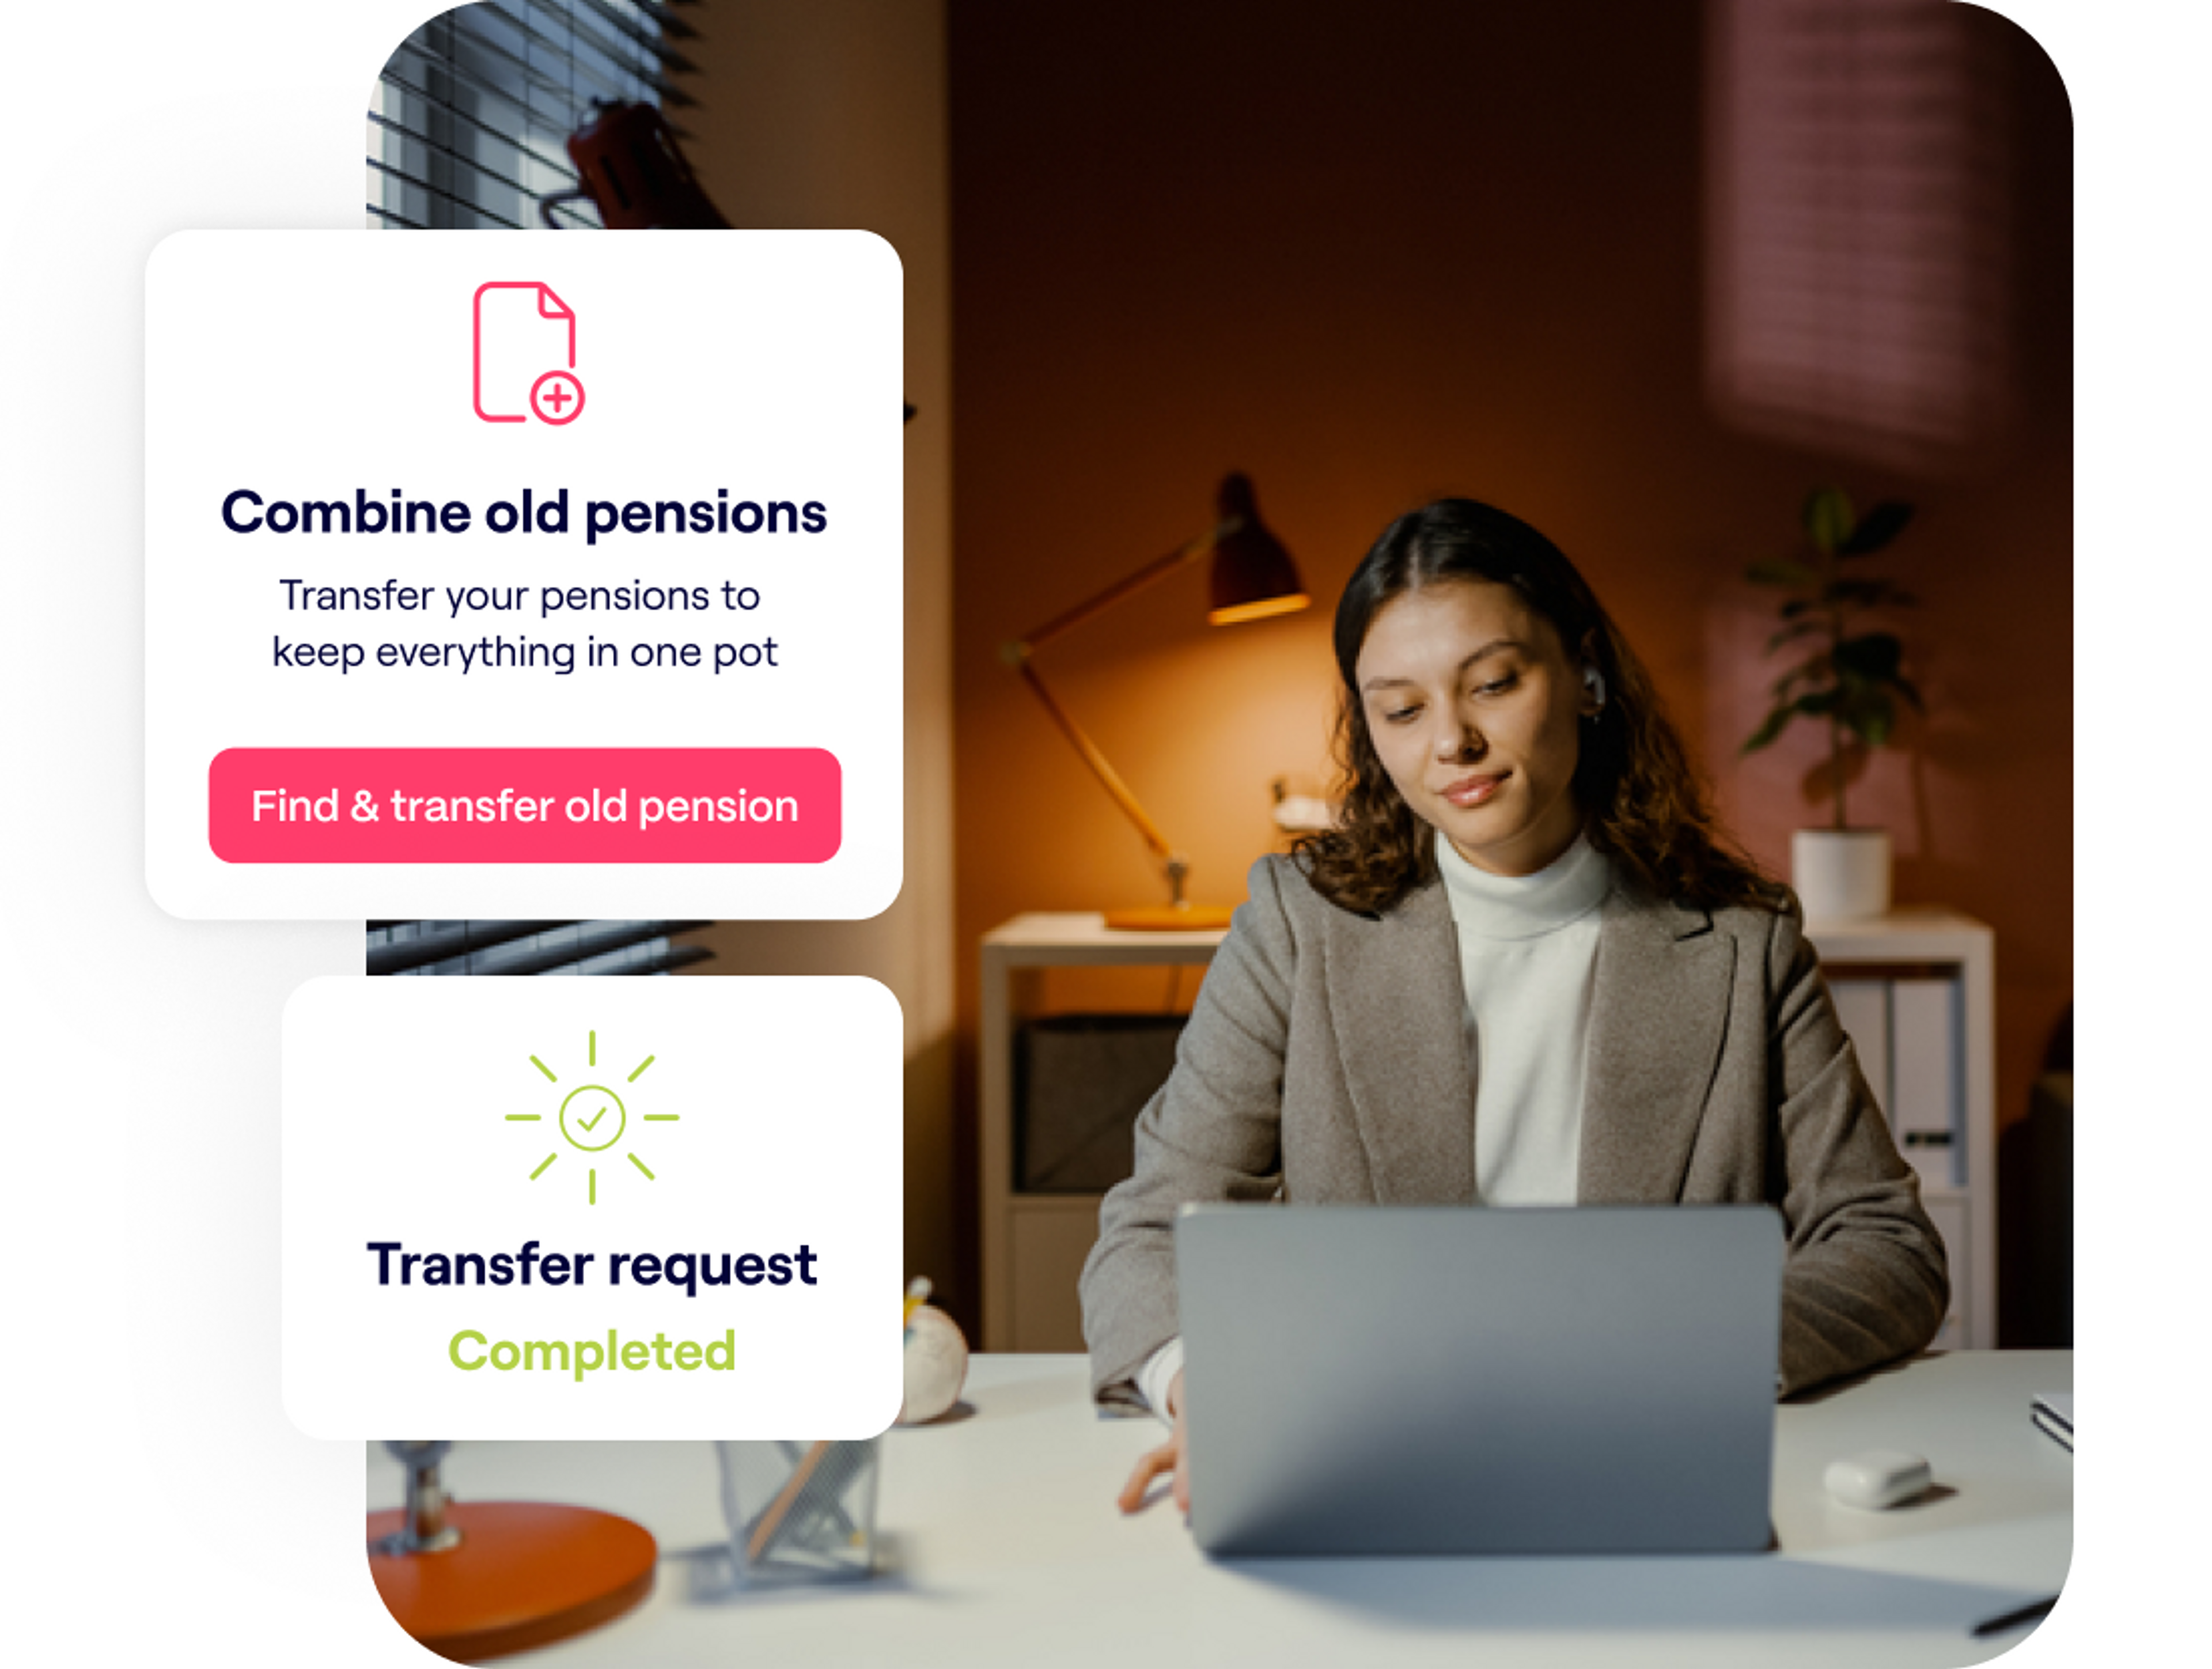 A photo of a woman looking at a laptop and excerpts of the Penfold pension app showing transfer pension screens